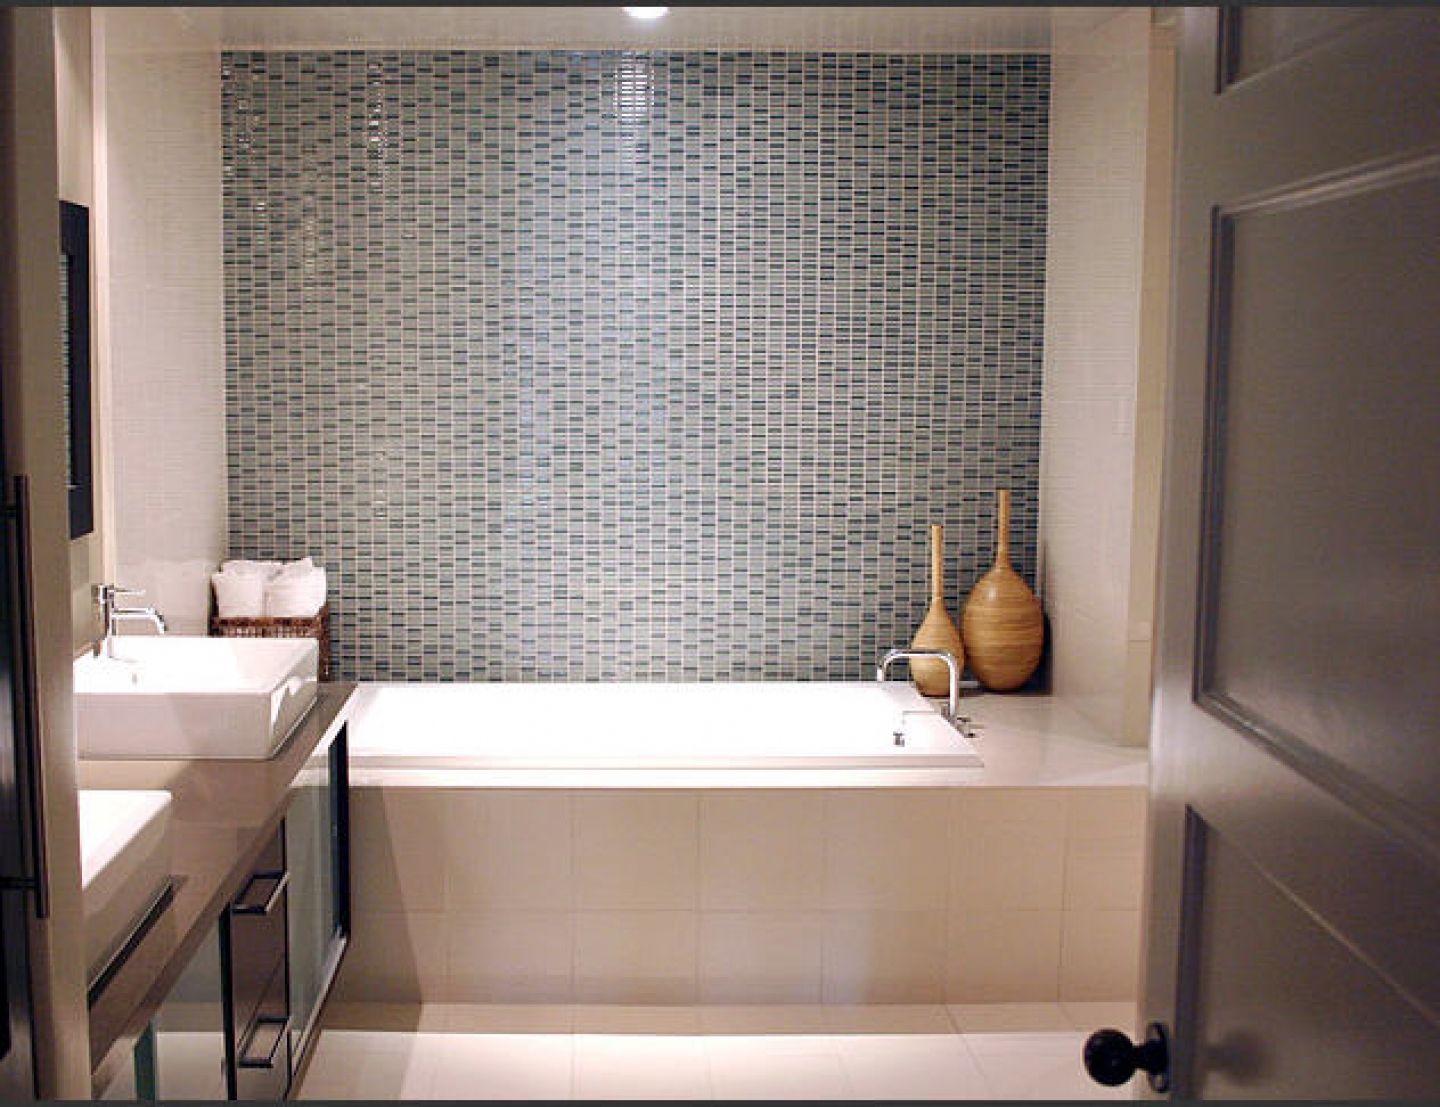 30 magnificent ideas and pictures of 1950s bathroom tiles designs